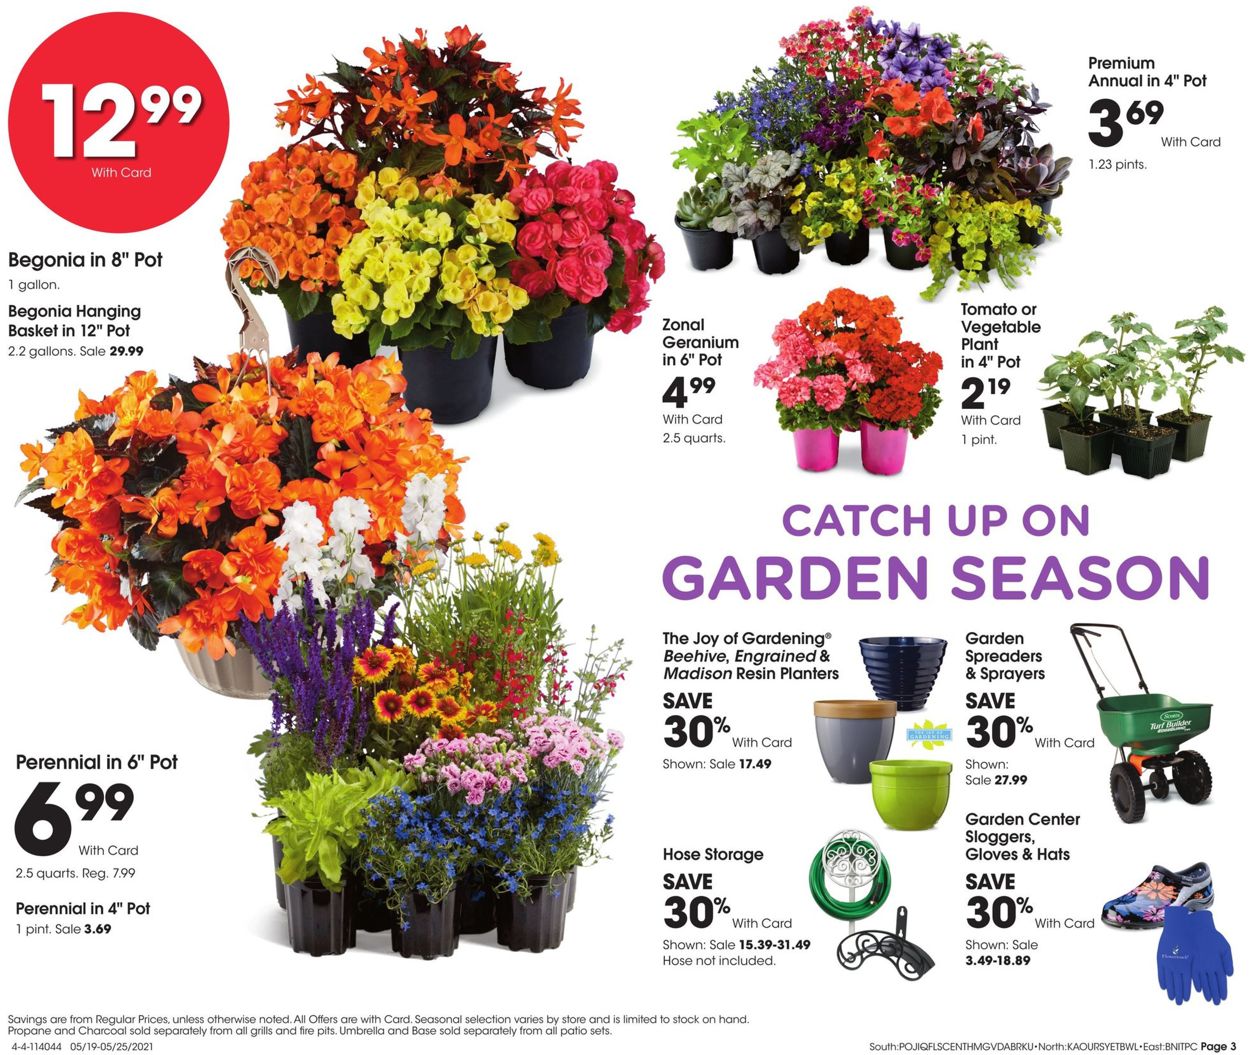 Fred Meyer Current Weekly Ad 0519 - 05252021 3 - Frequent-adscom